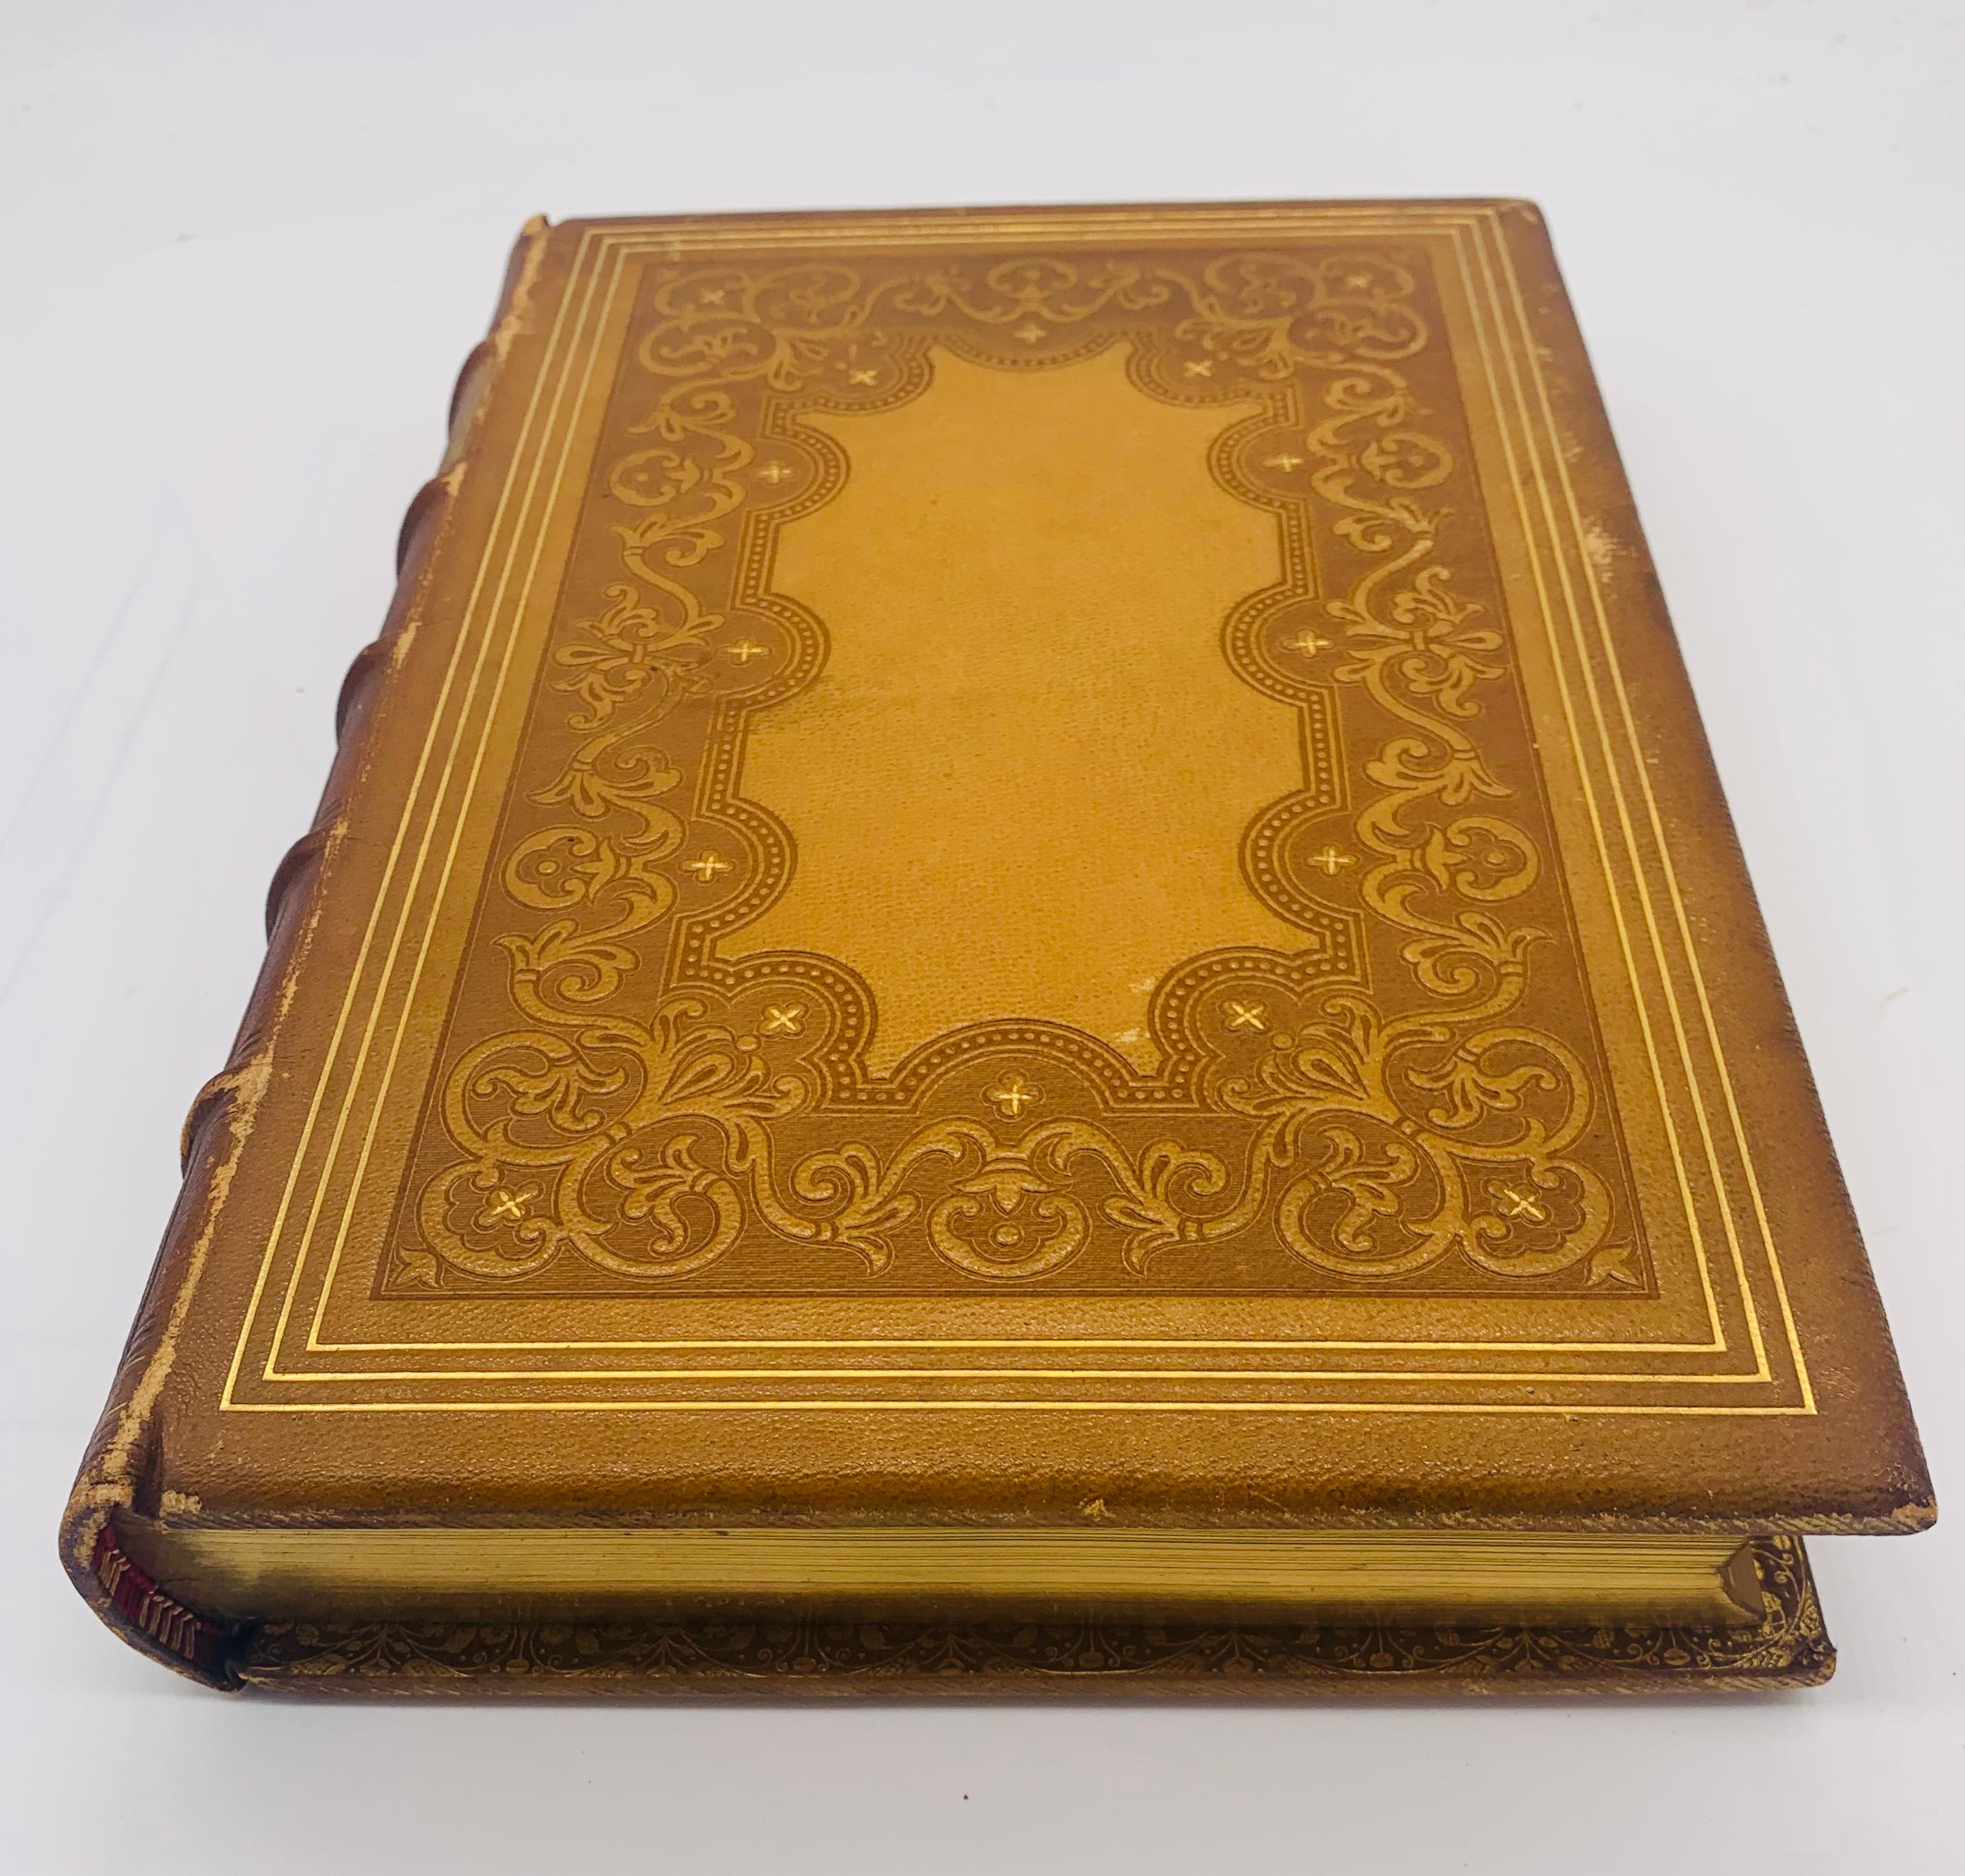 A Gallery of Distinguished English and American Poets (1859) with 100 Engravings - VERY NICE BINDING